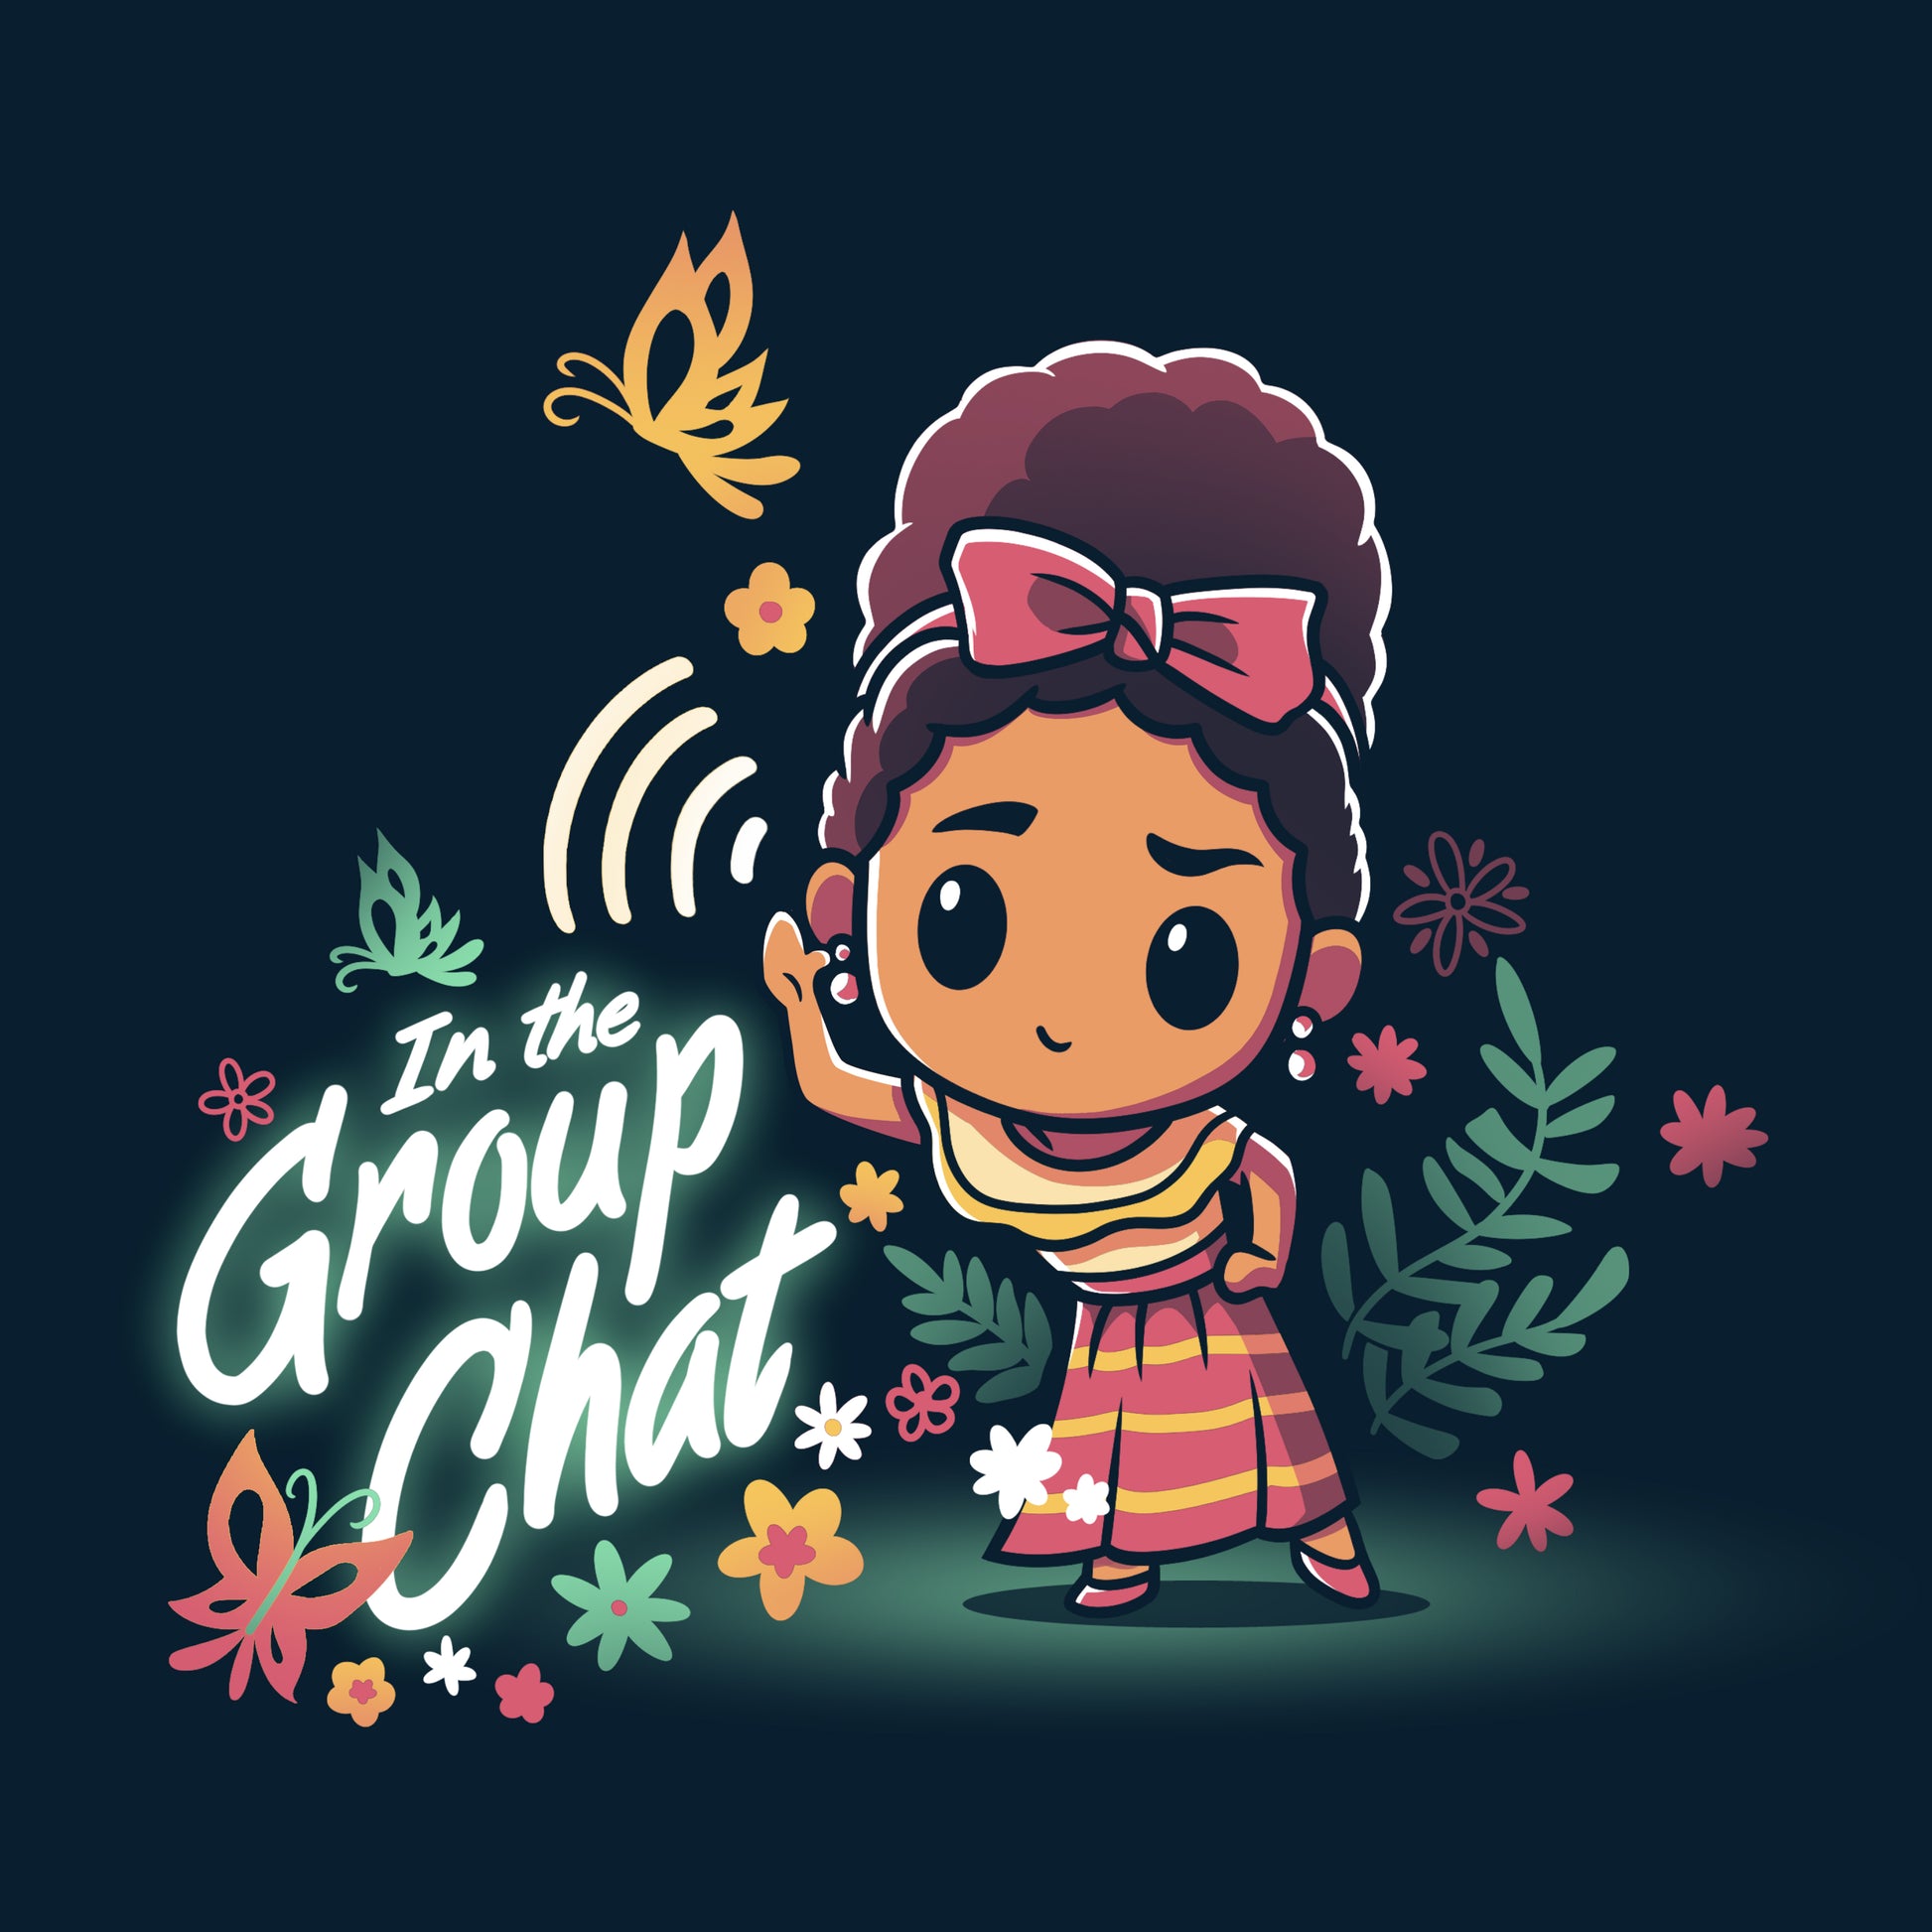 An Encanto-inspired girl with a flower in her hair delightfully joins the "In the Group Chat" from Disney.